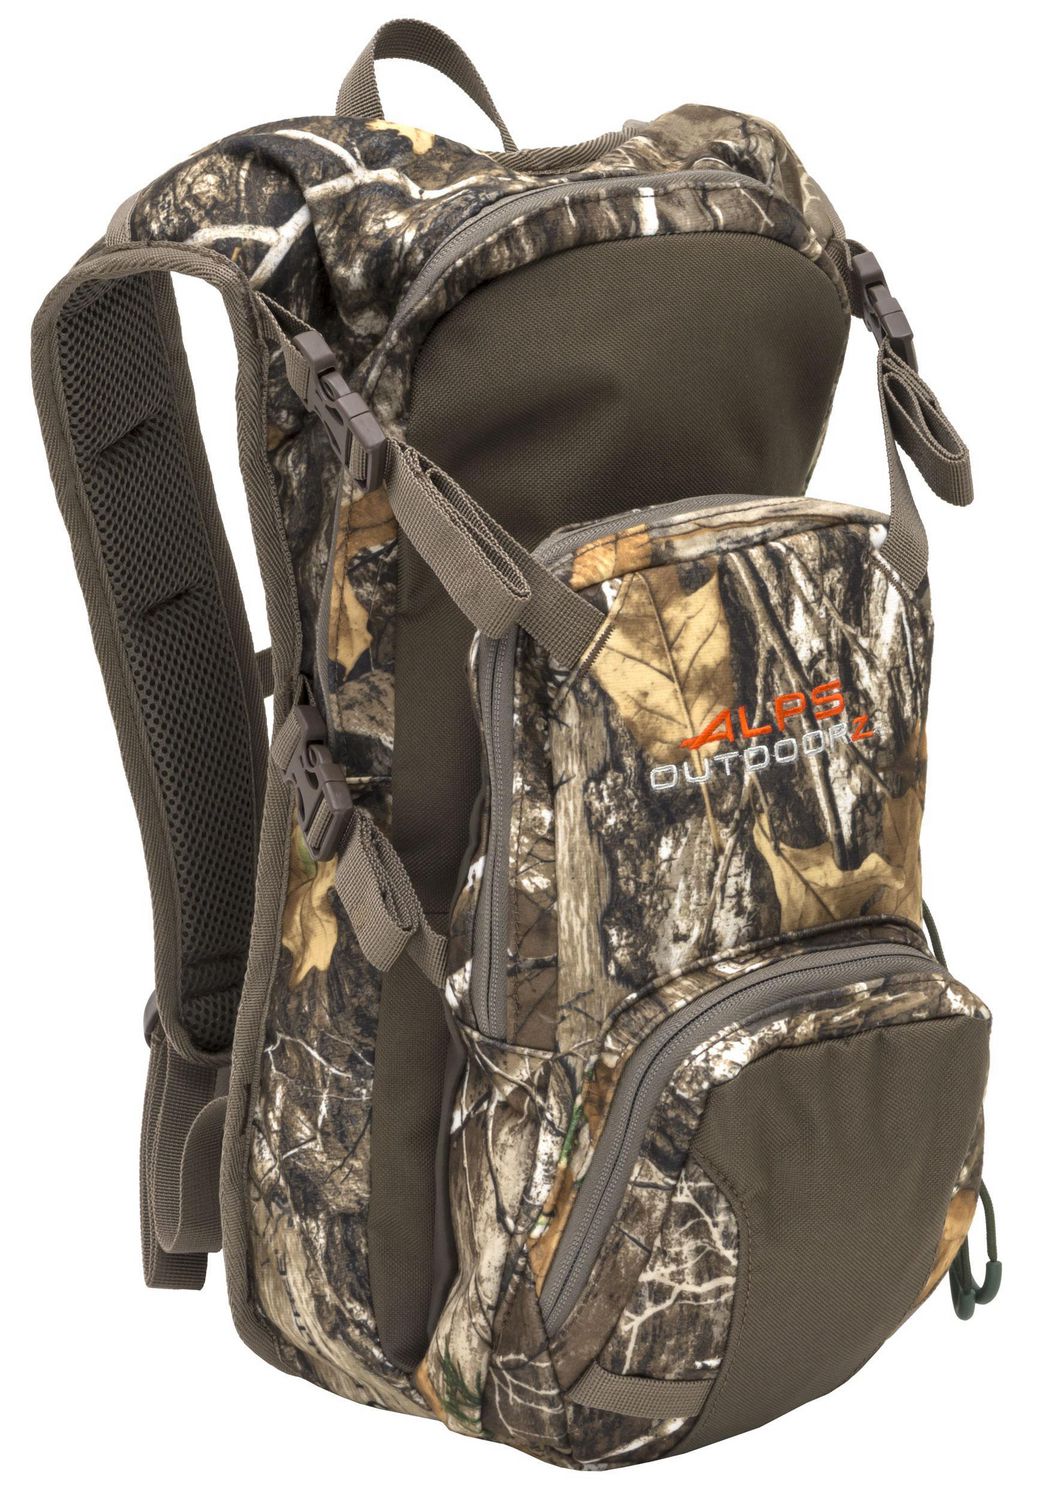 Alps Outdoorz Willow Creek Hydration Scouting Pack - Realtree Edge ...